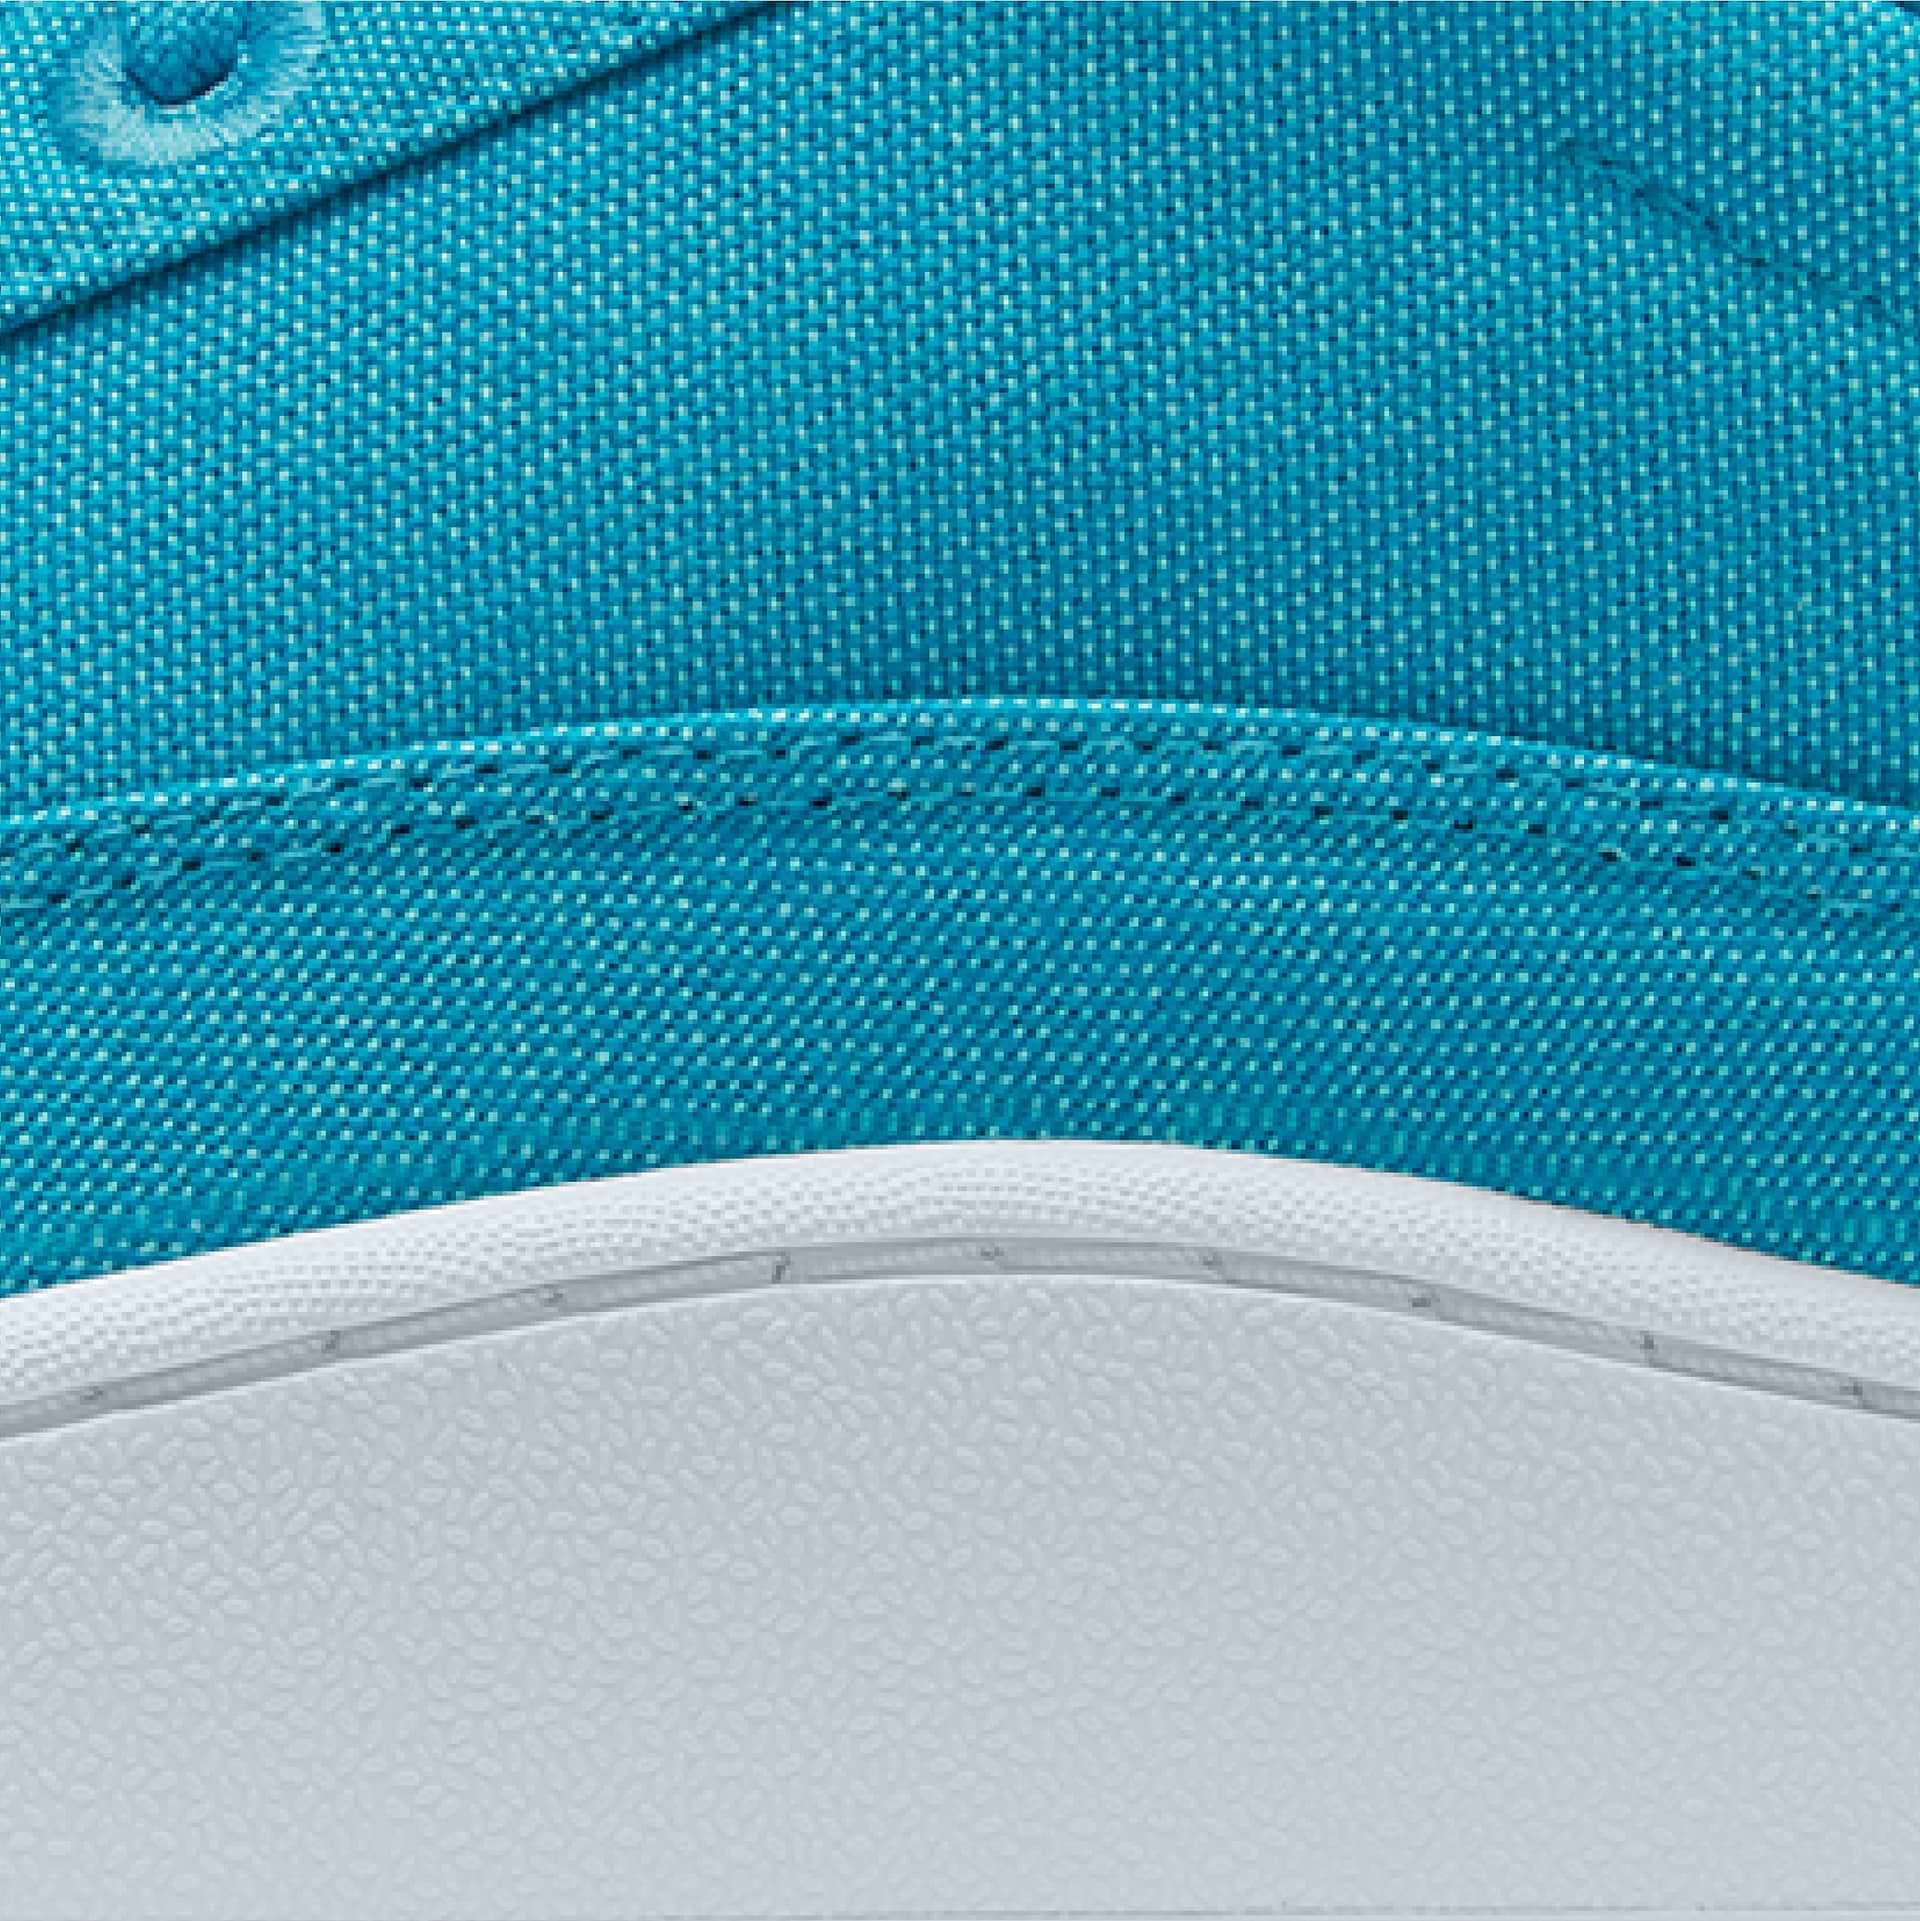 Women's Canvas Pacers - Thrive Teal (Clarity Blue Sole)